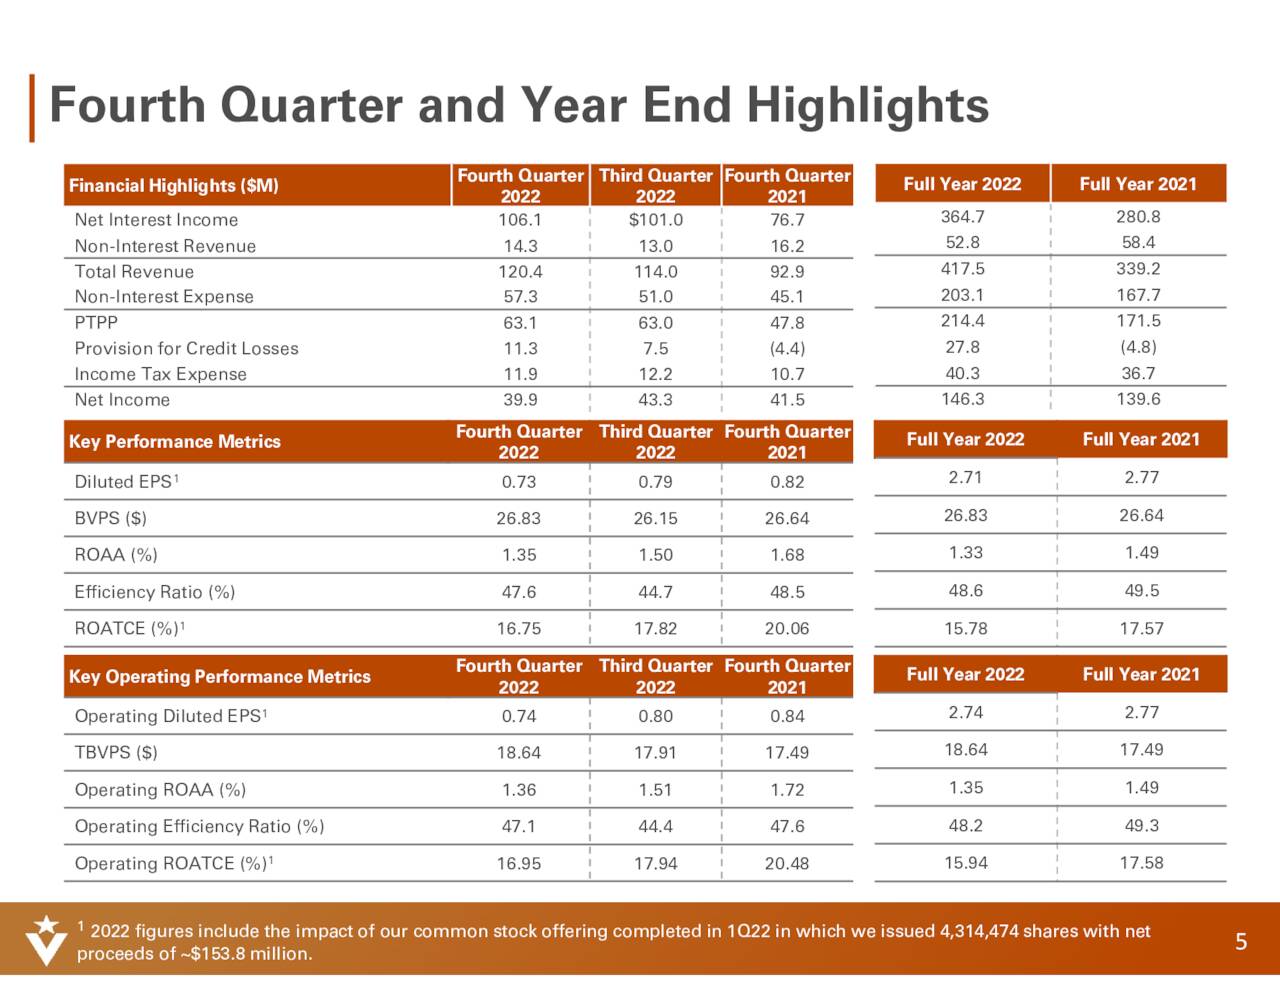 Fourth Quarter and Year End Highlights